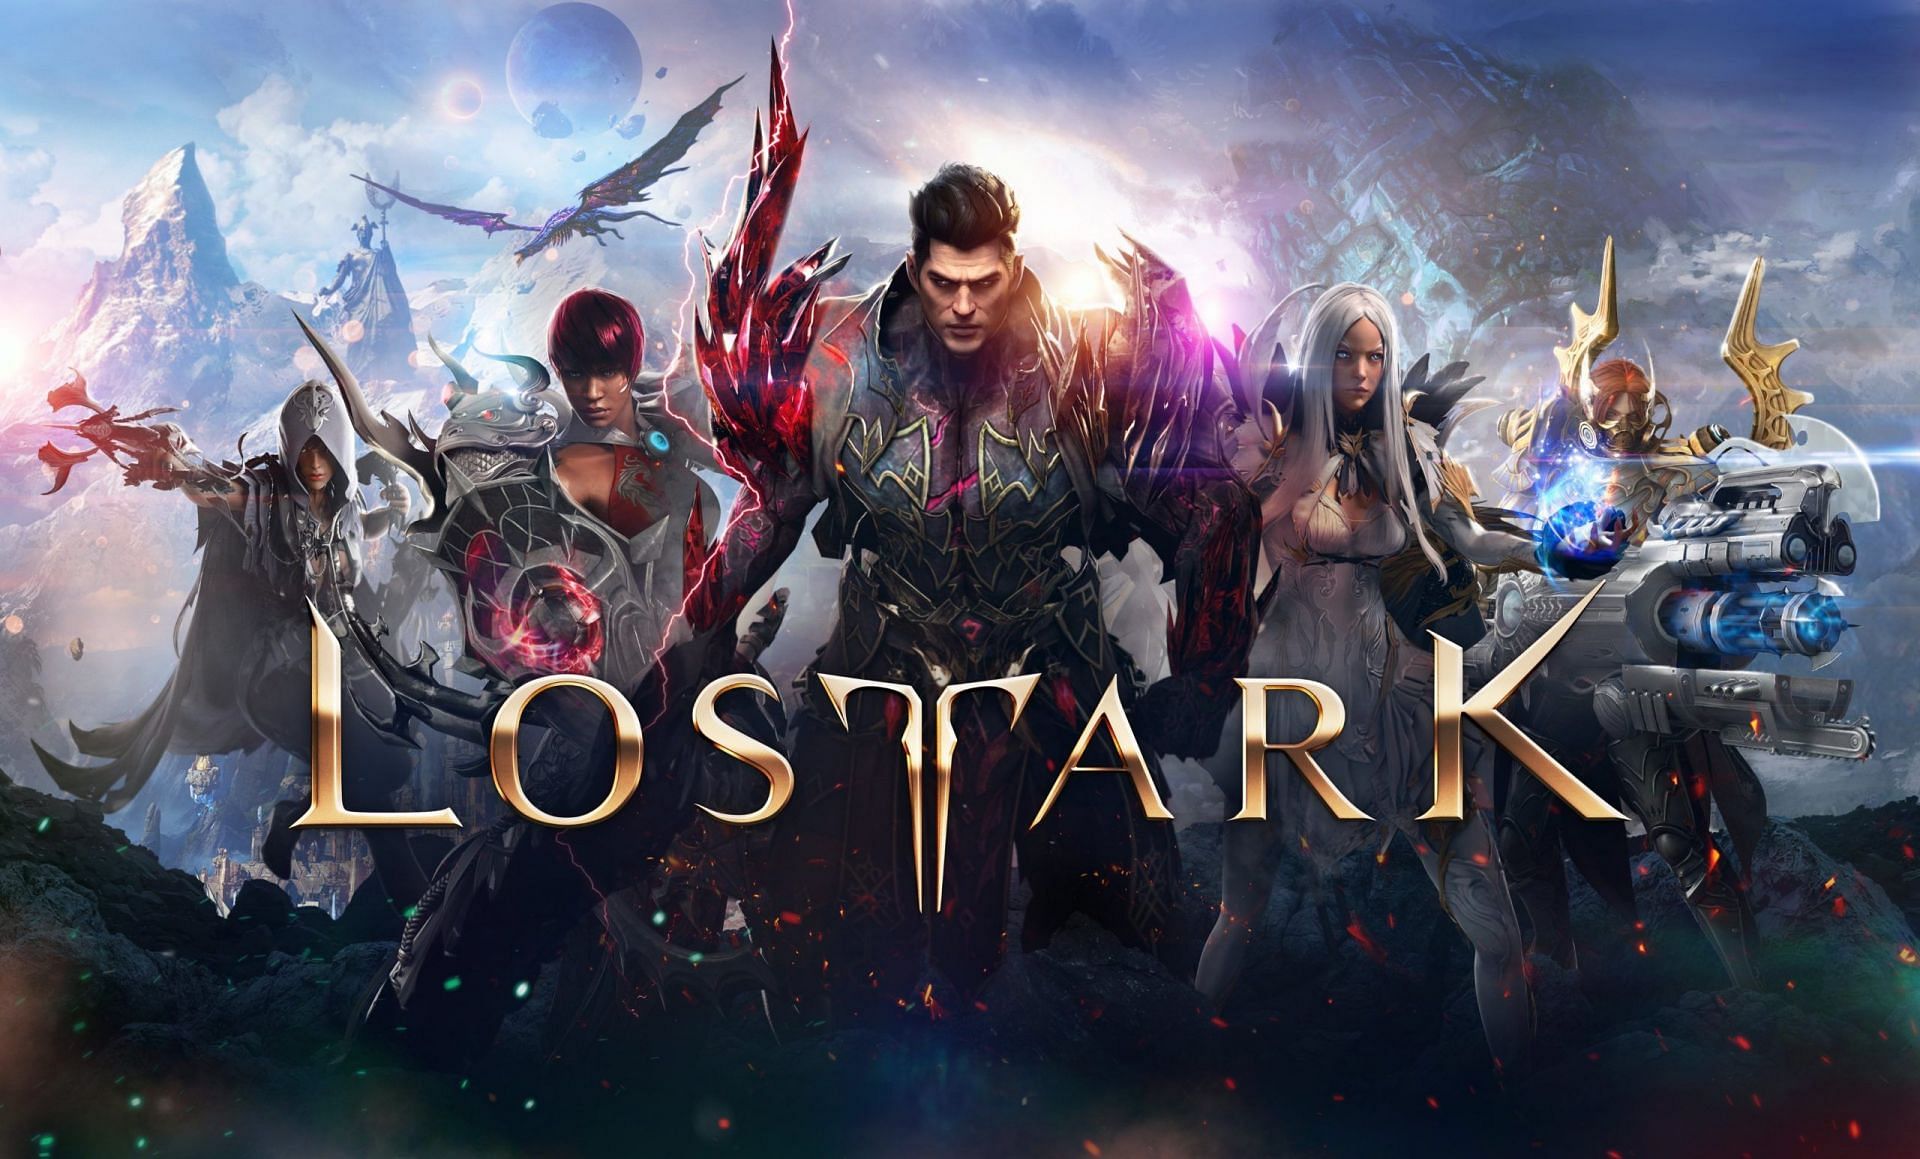 Lost Ark drops in the US on February 11, 2022. Image via Smilegate RPG